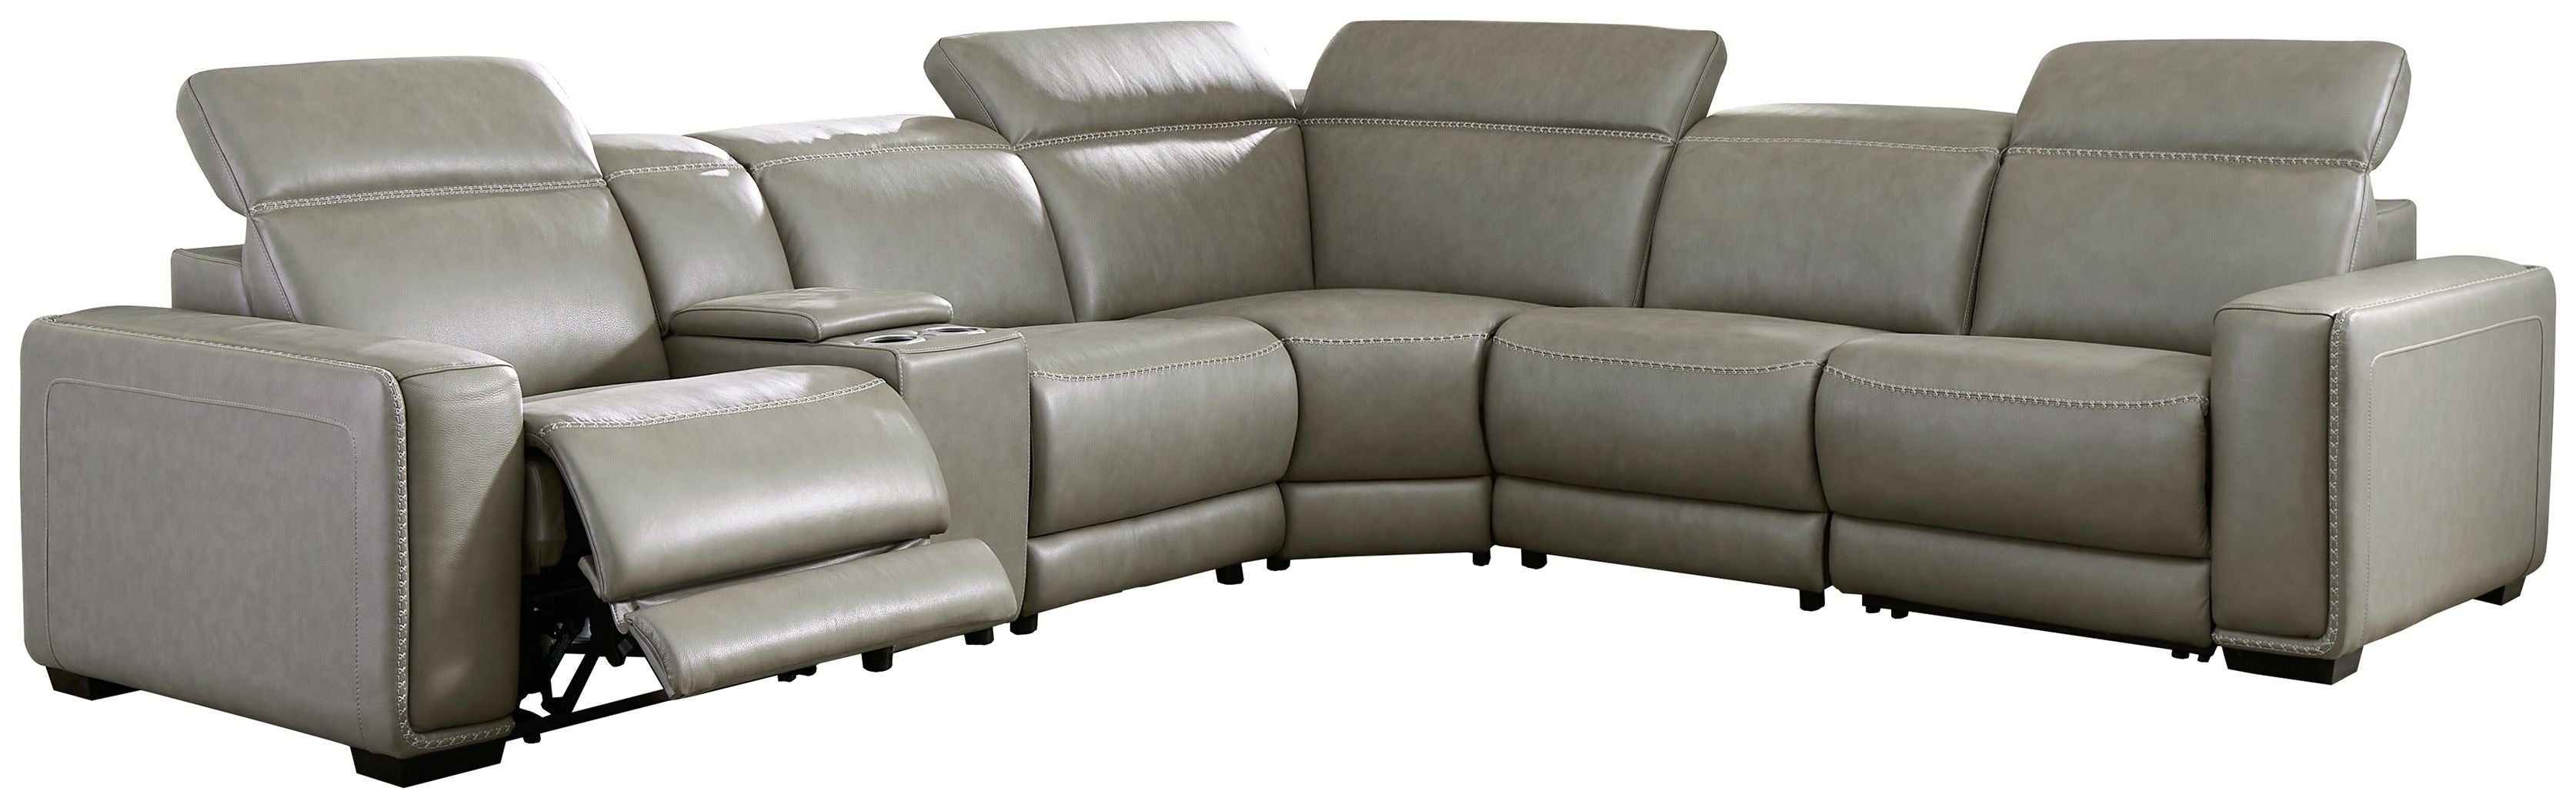 Correze Gray Leather Power Reclining Sectional